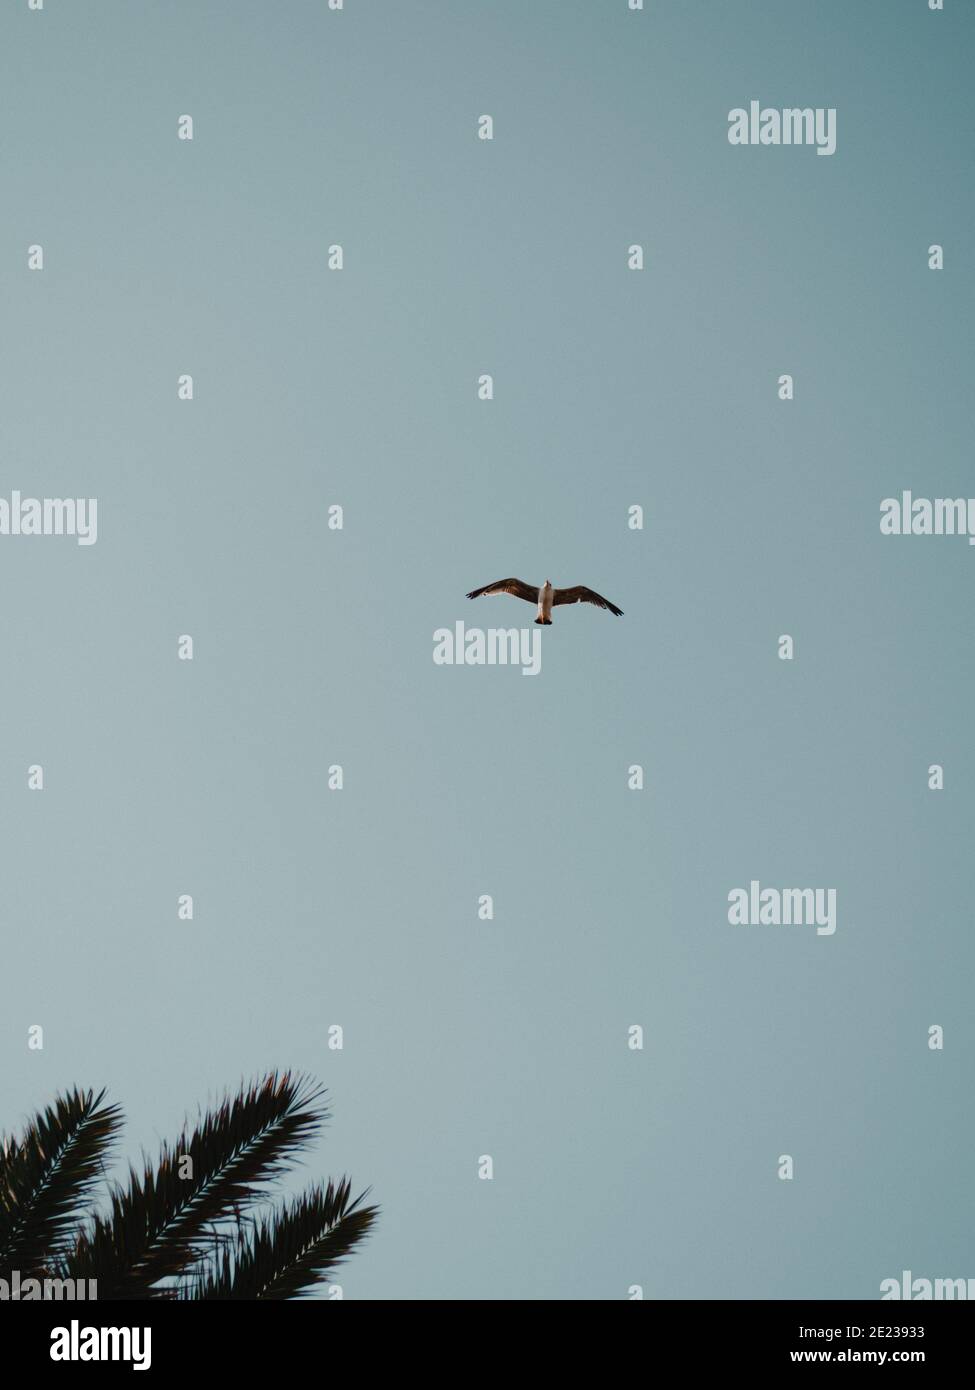 A bird flying in the perfect blue sky. Stock Photo